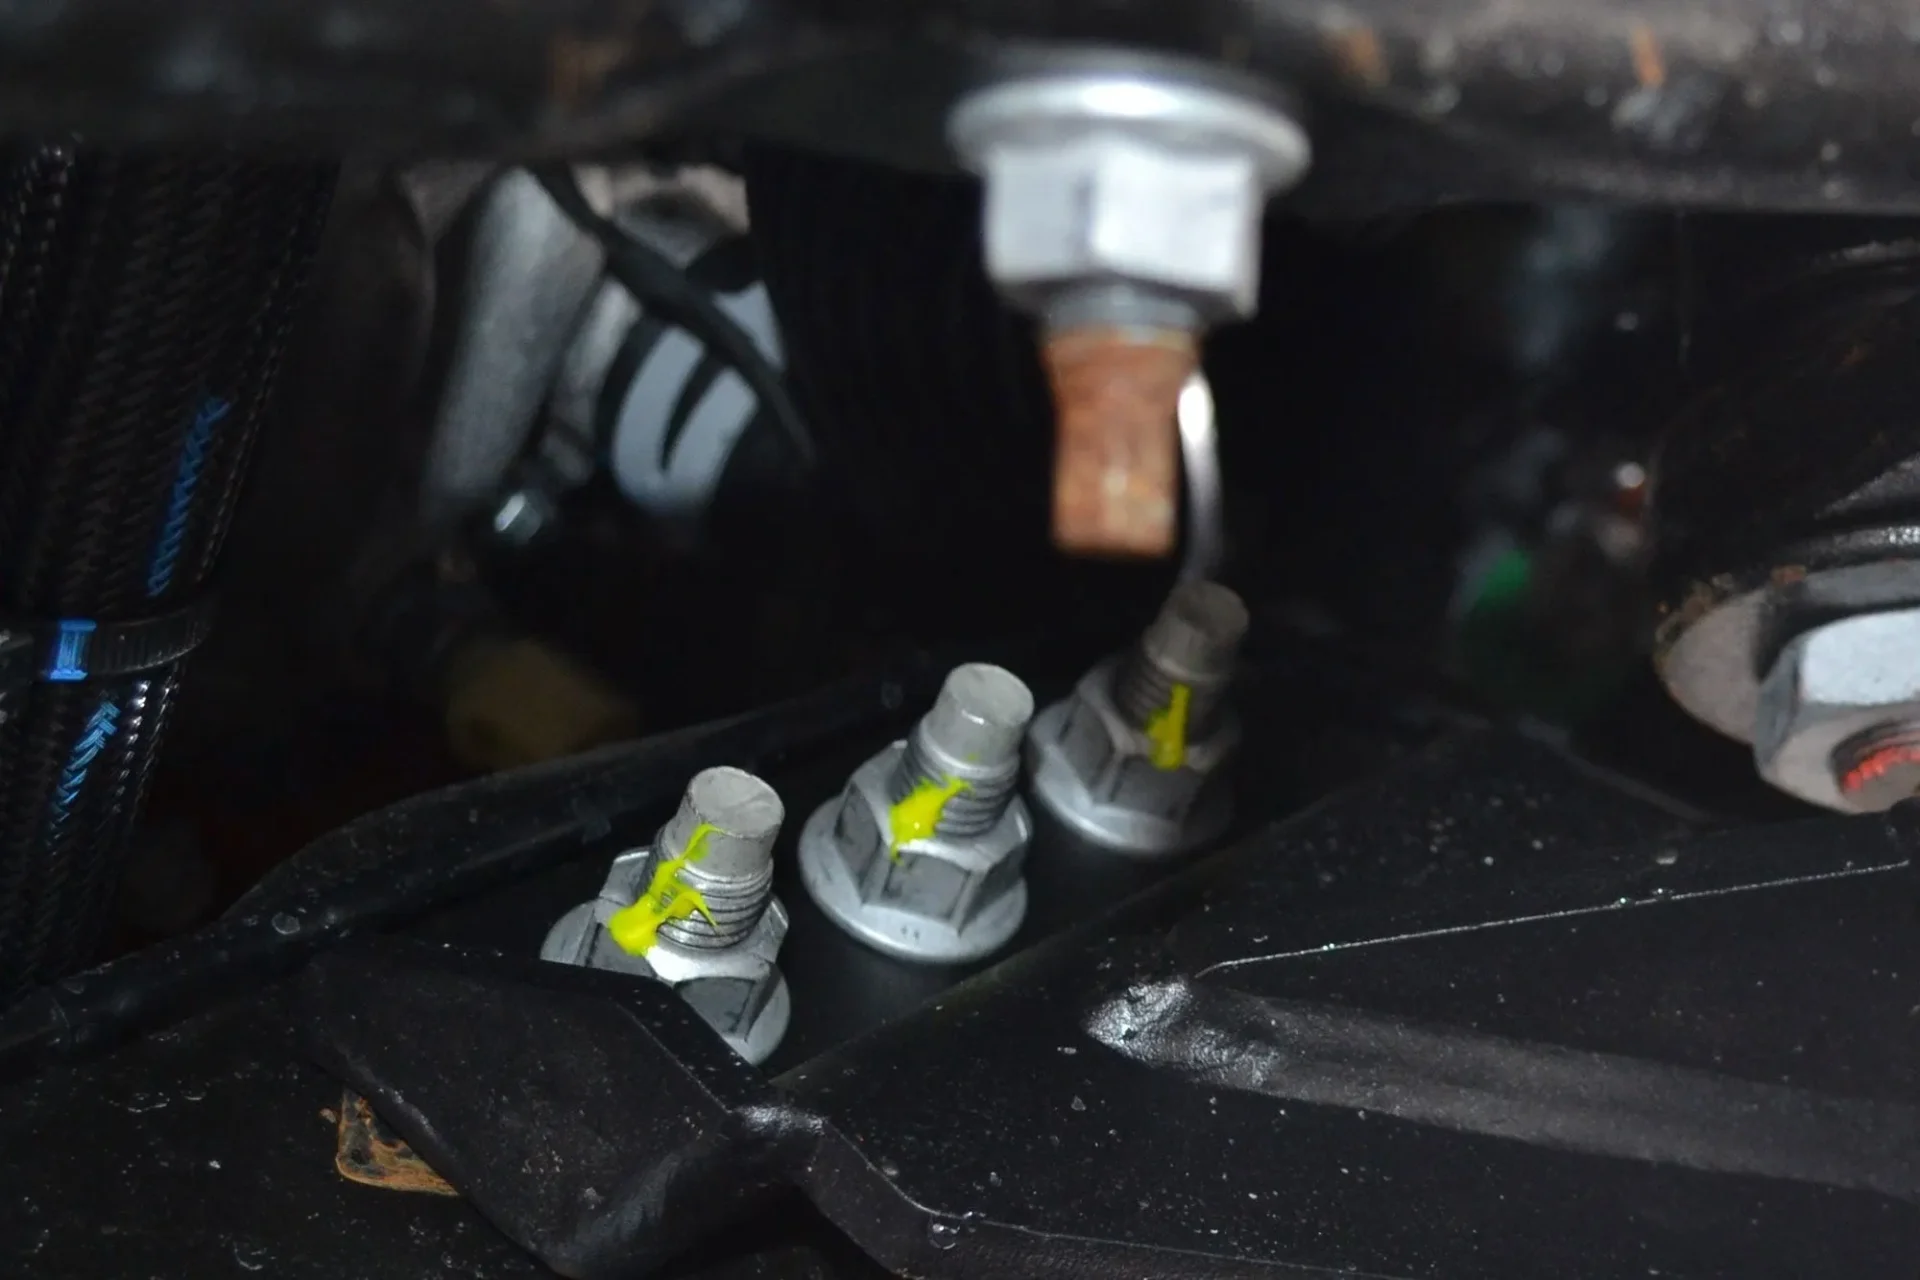 Close-up of automotive spark plugs and ignition components under a vehicle's hood.